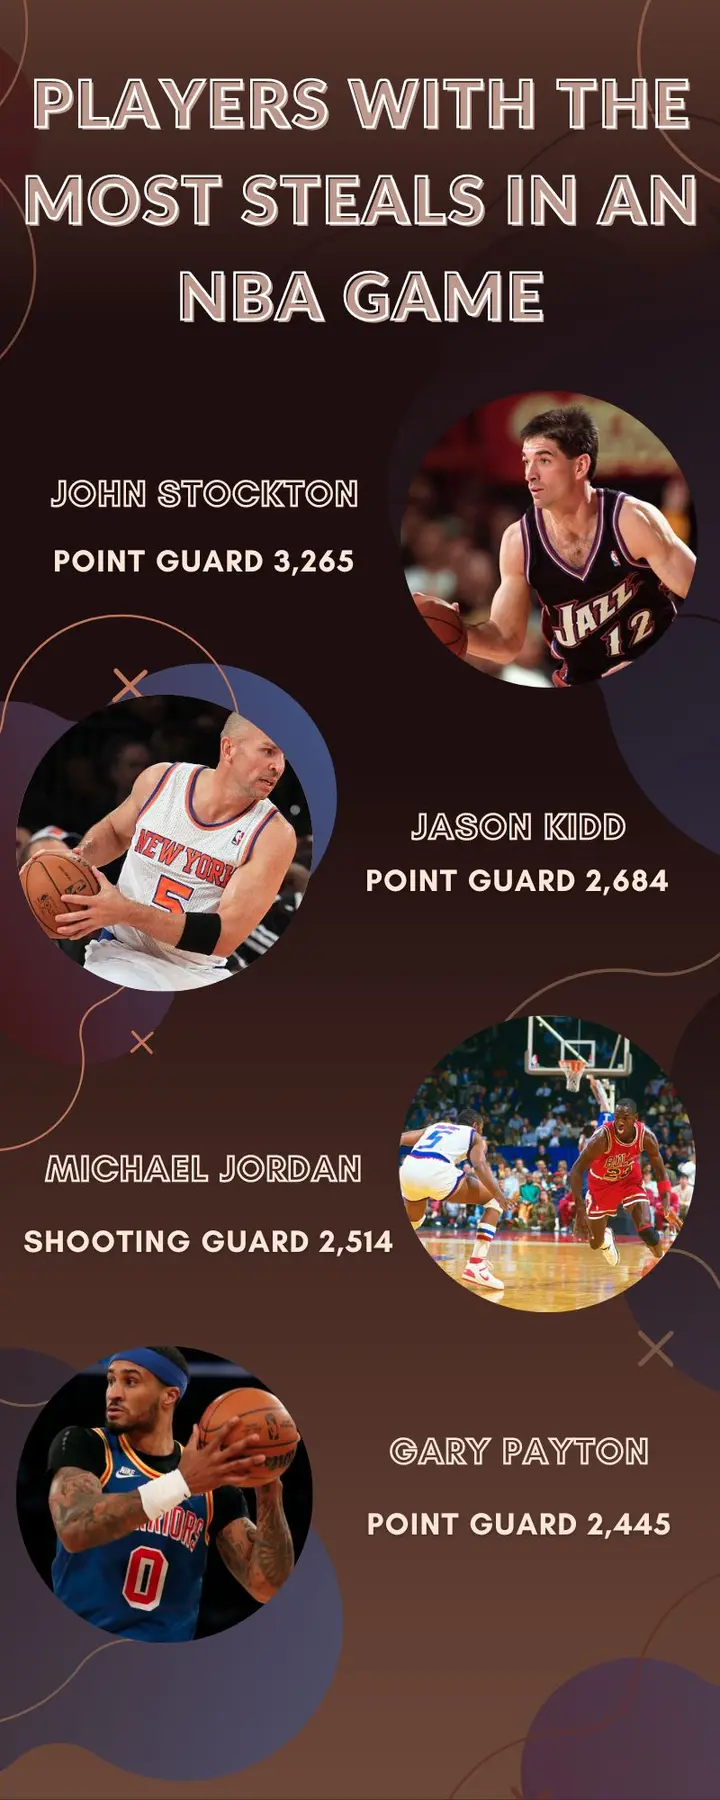 Players with the most steals in an NBA game